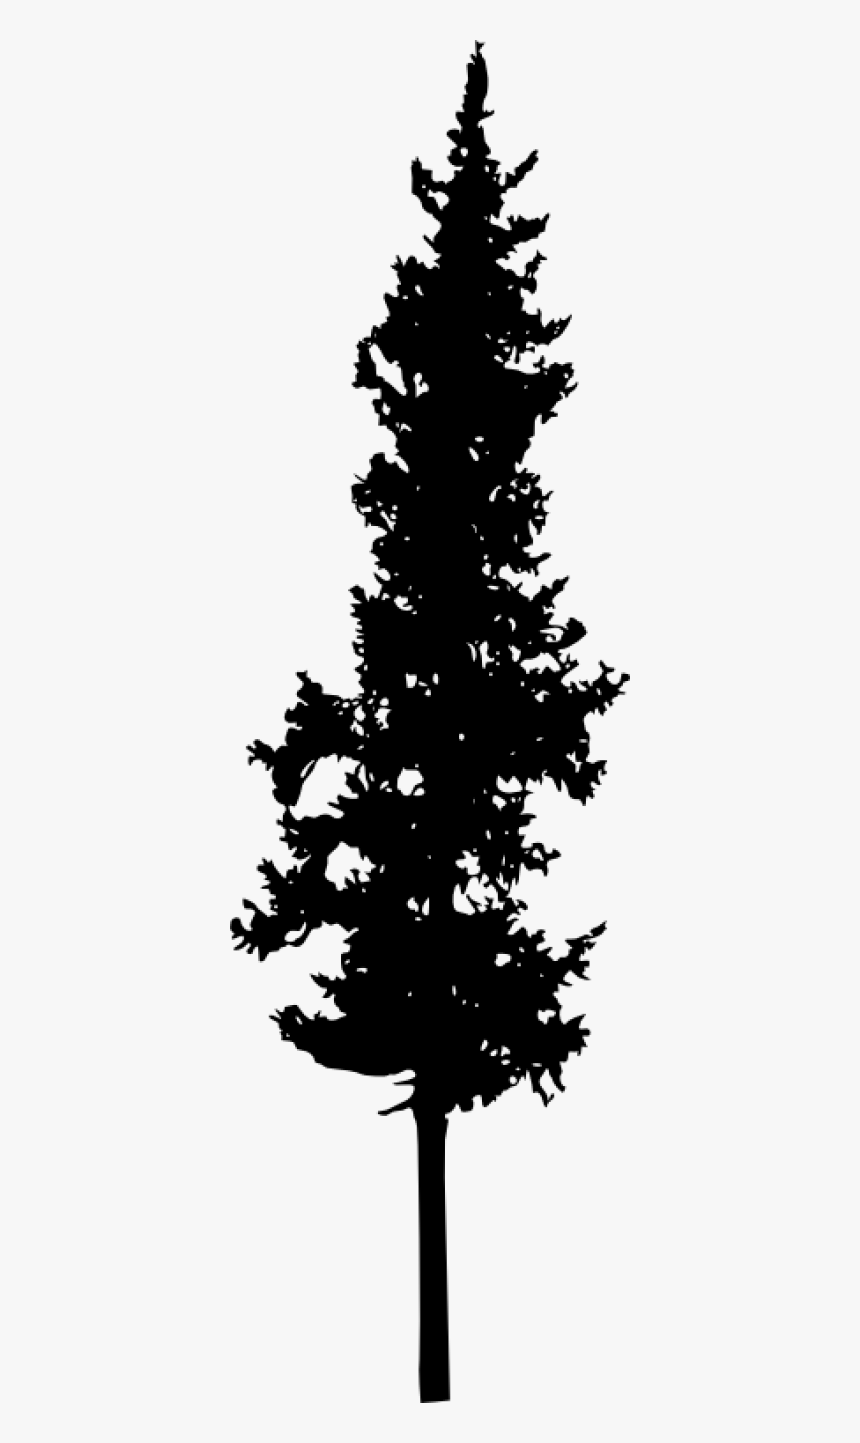 30 Pine Tree Silhouette Vol - Transparent 2 Silhouette Pine Trees, HD Png Download, Free Download